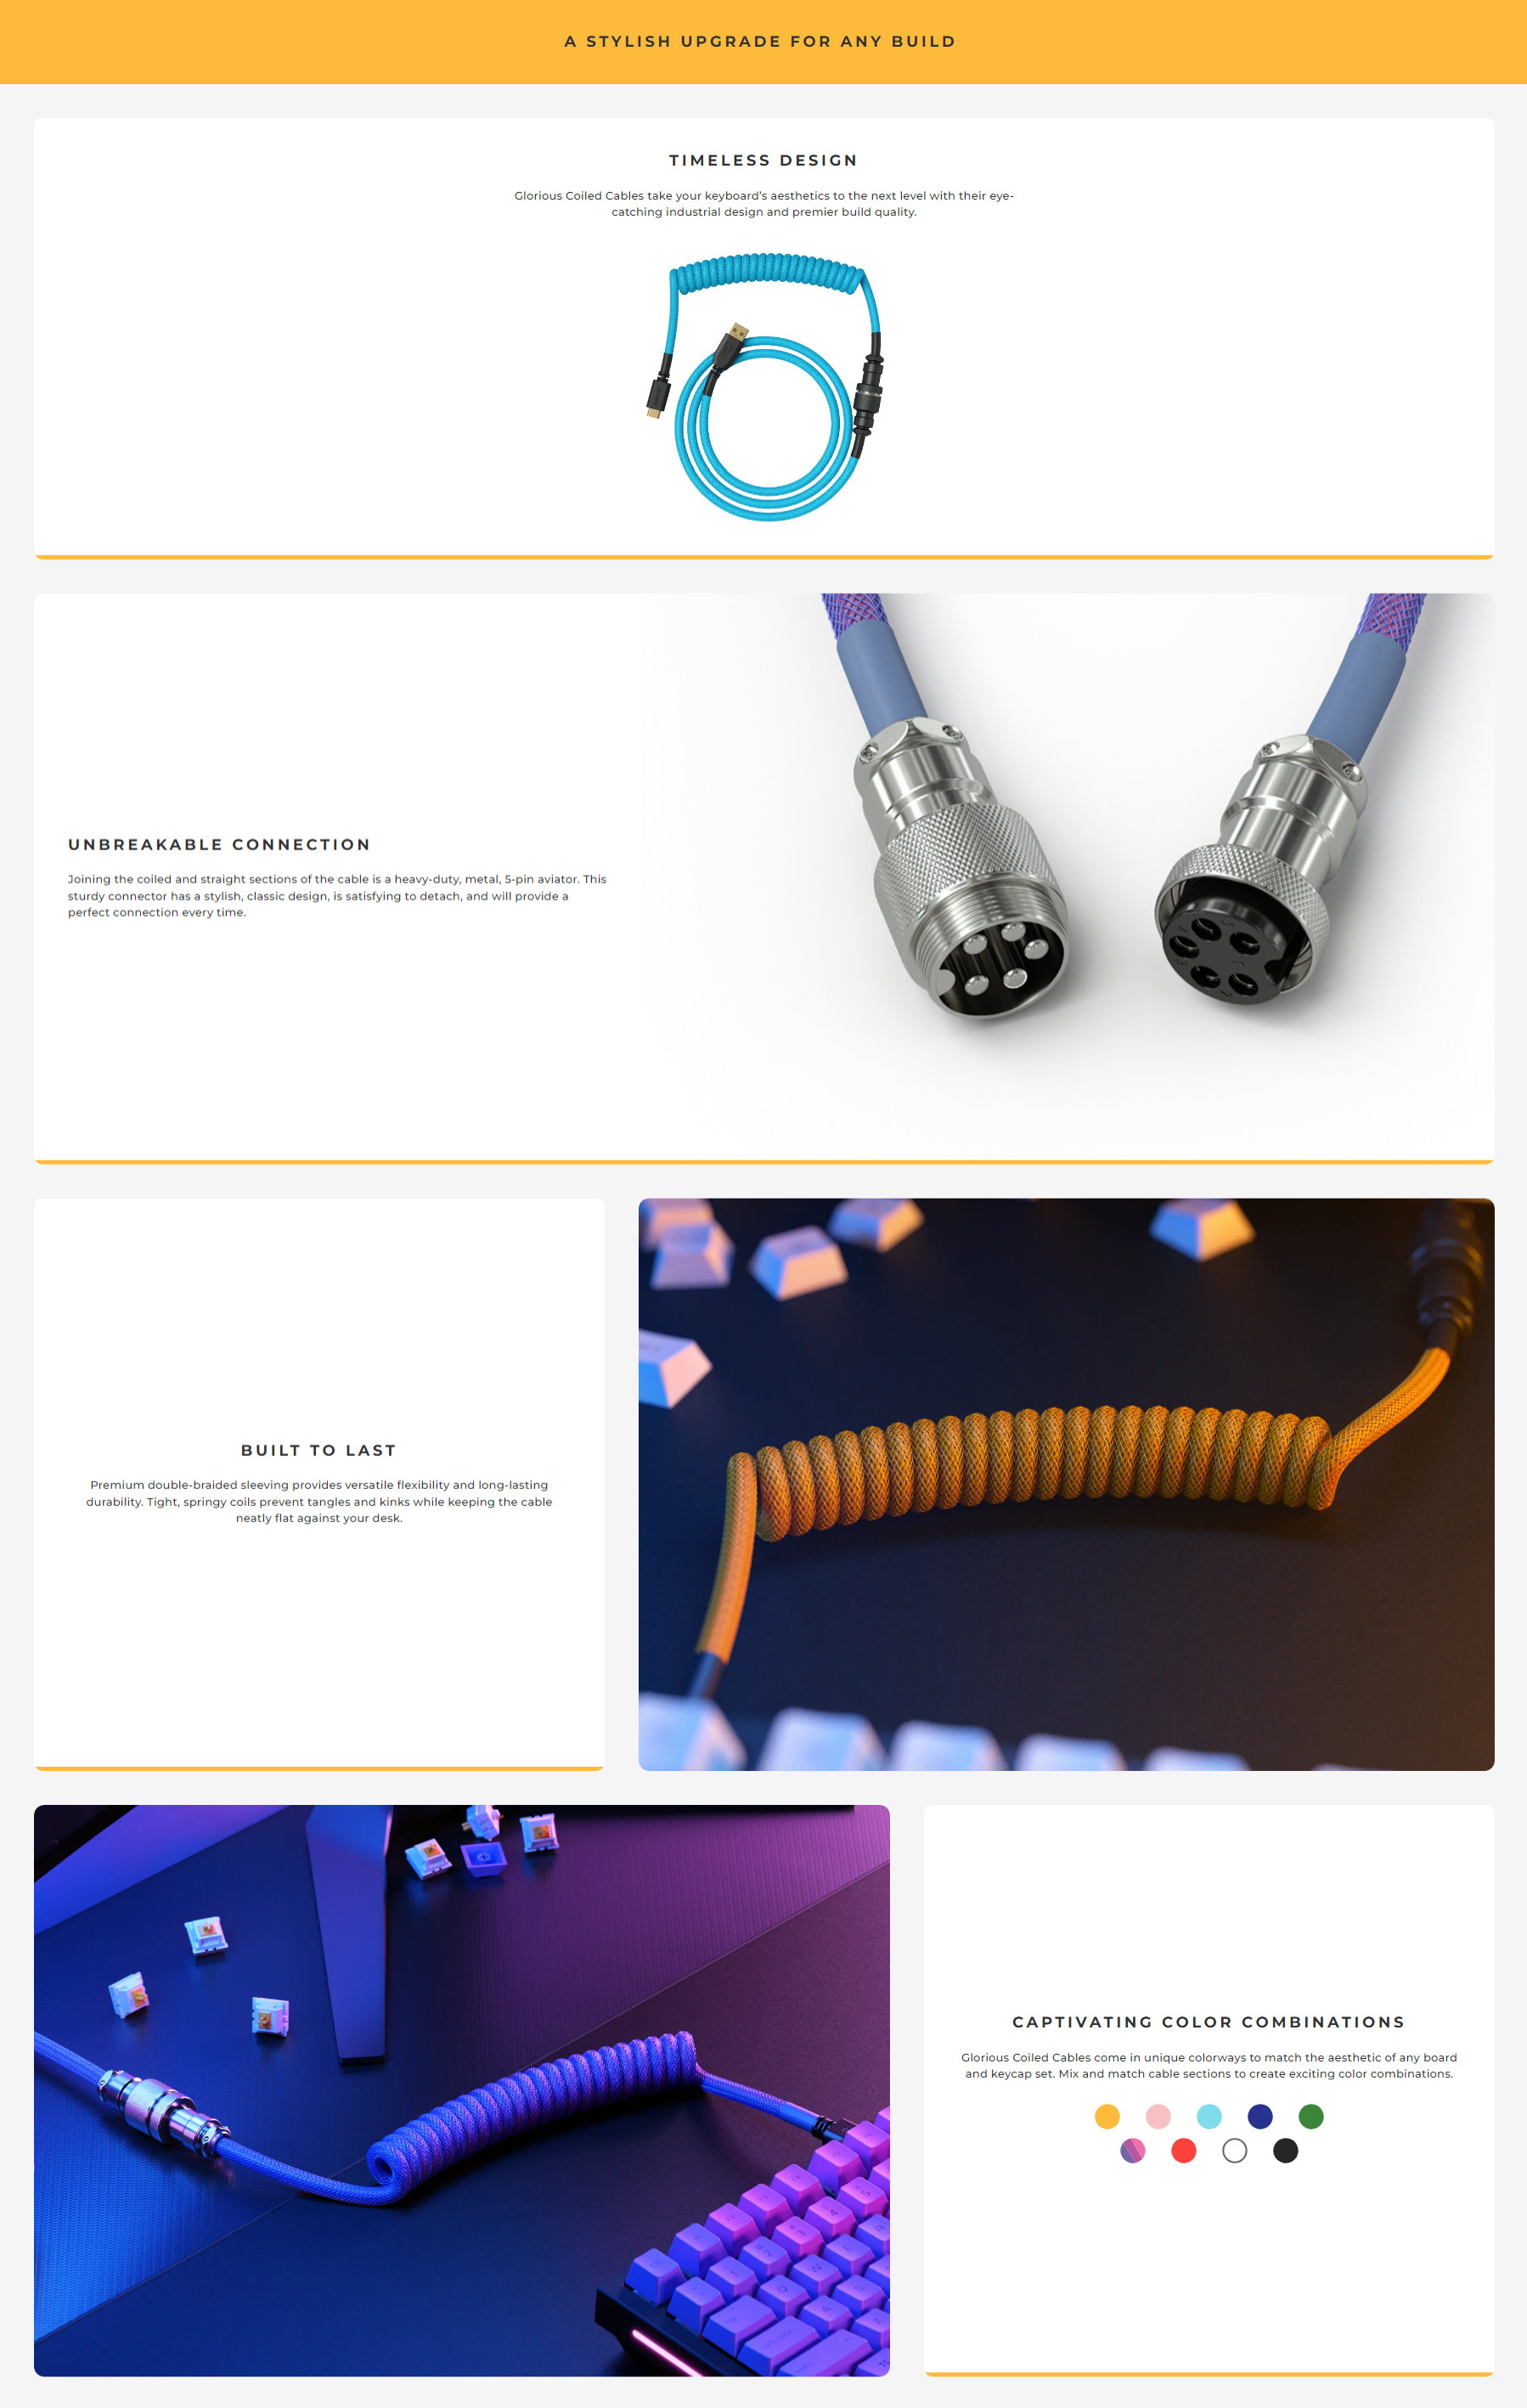 A large marketing image providing additional information about the product Glorious Coiled USB-C Keyboard Cable - Cobalt Blue - Additional alt info not provided